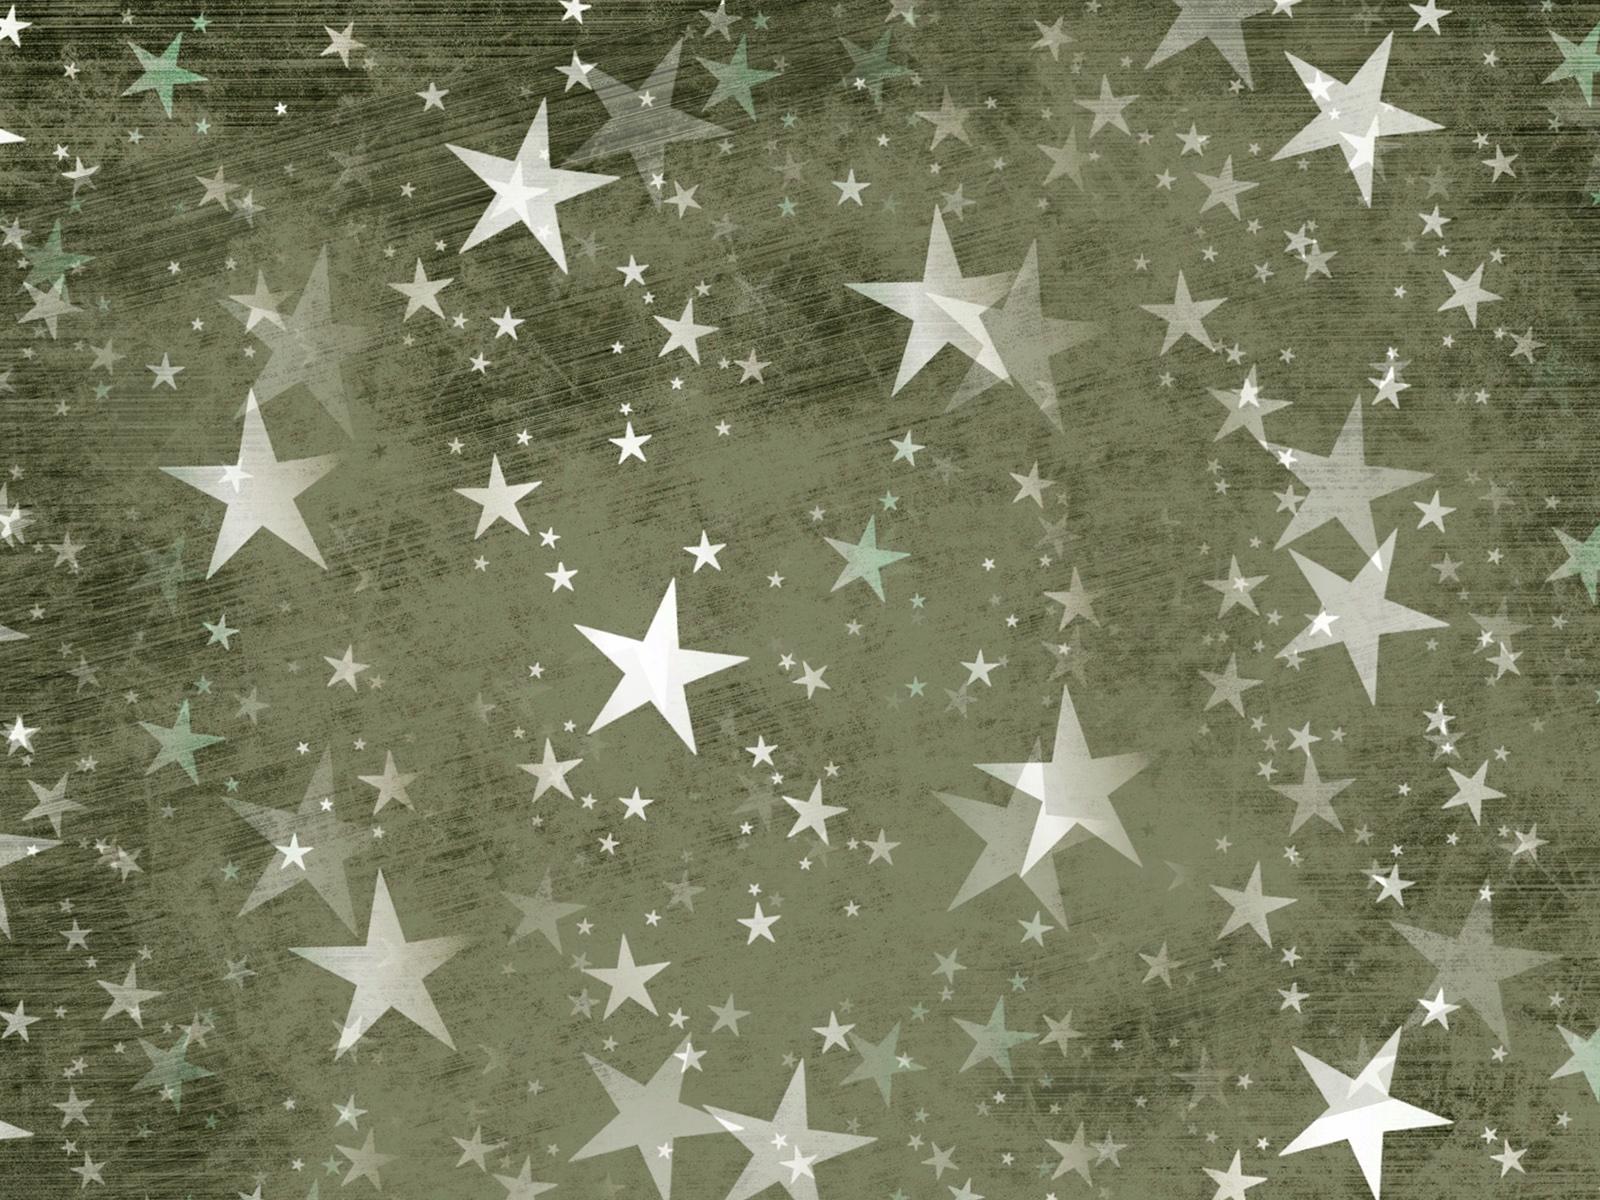 Grunge background with Stars Texture Free PPT Background